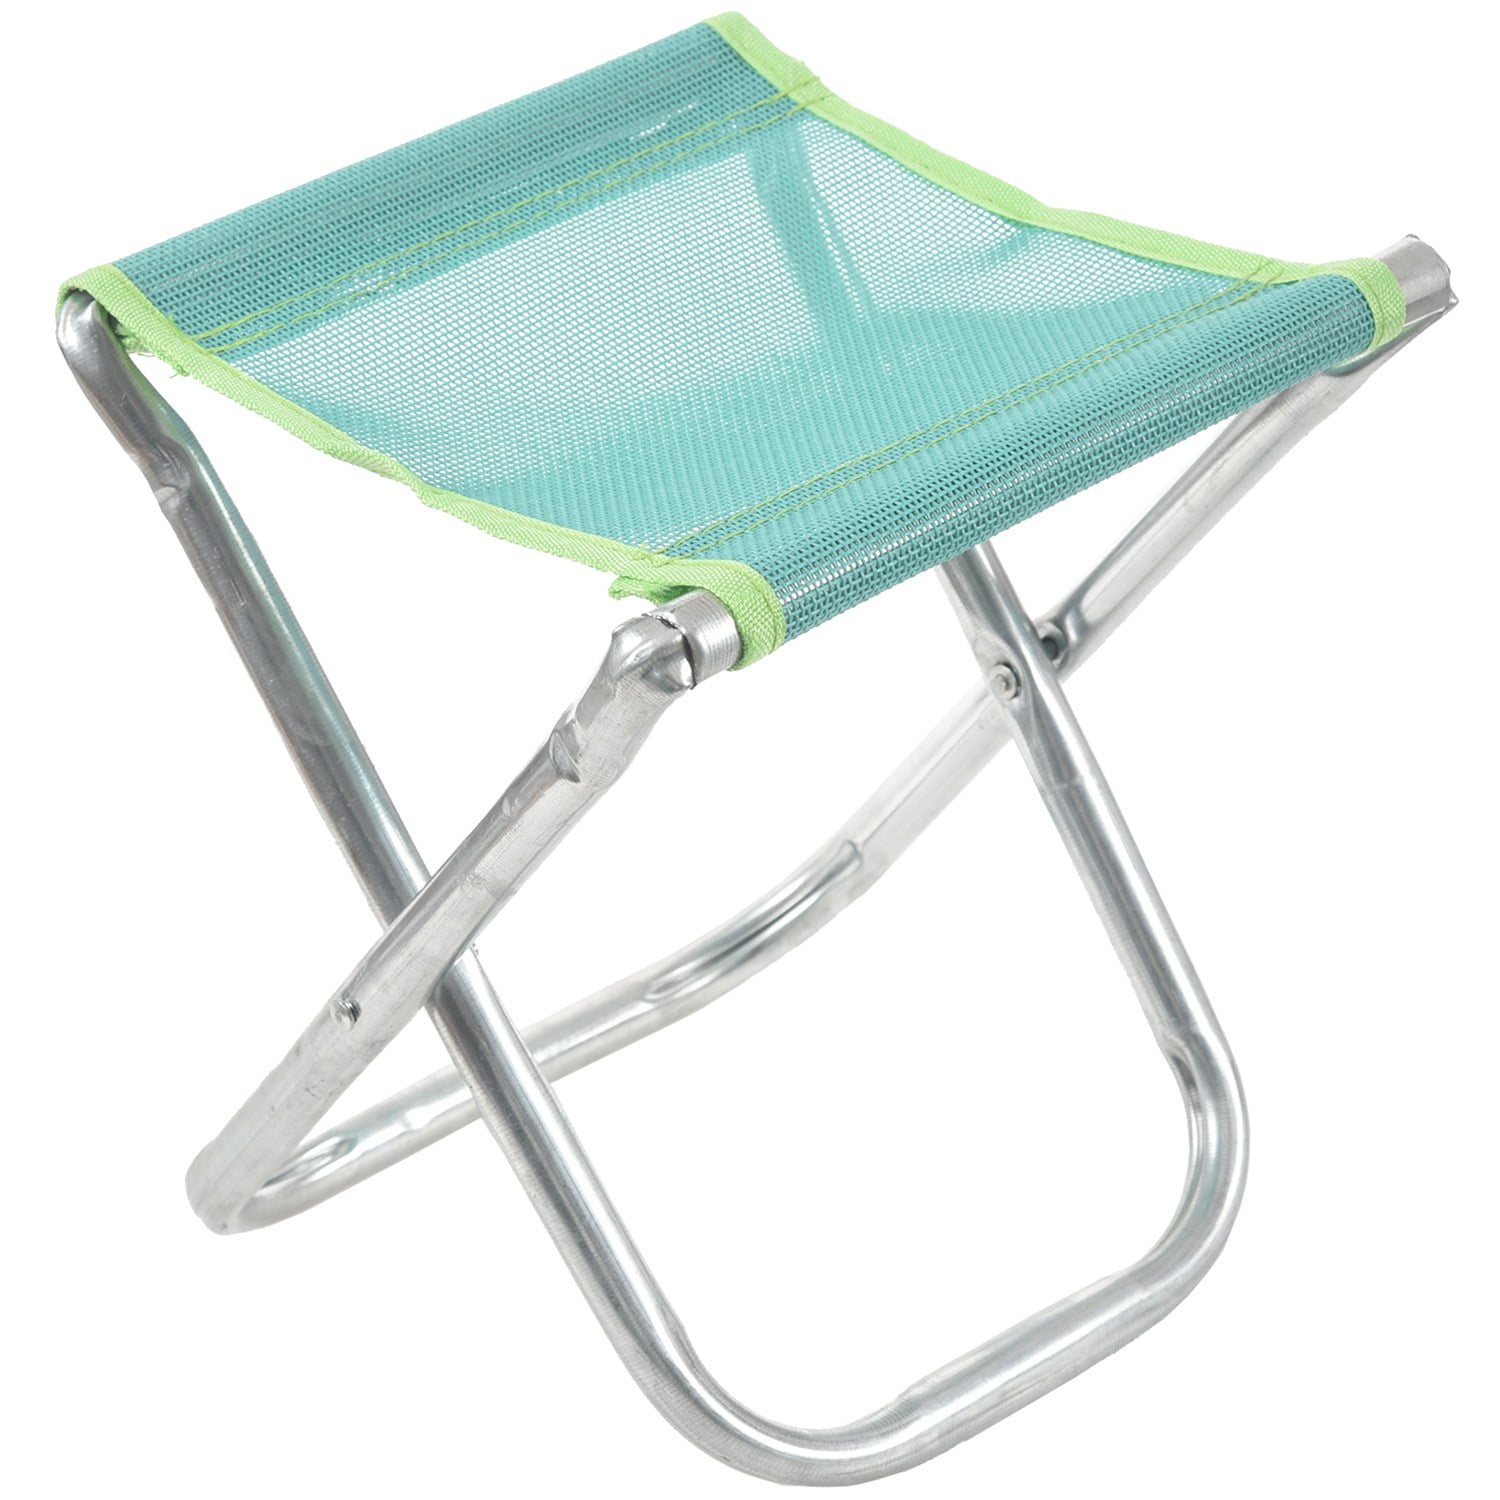 Portable Folding Stool Aluminum Alloy Outdoors Chair for Fishing Camping Picnic 